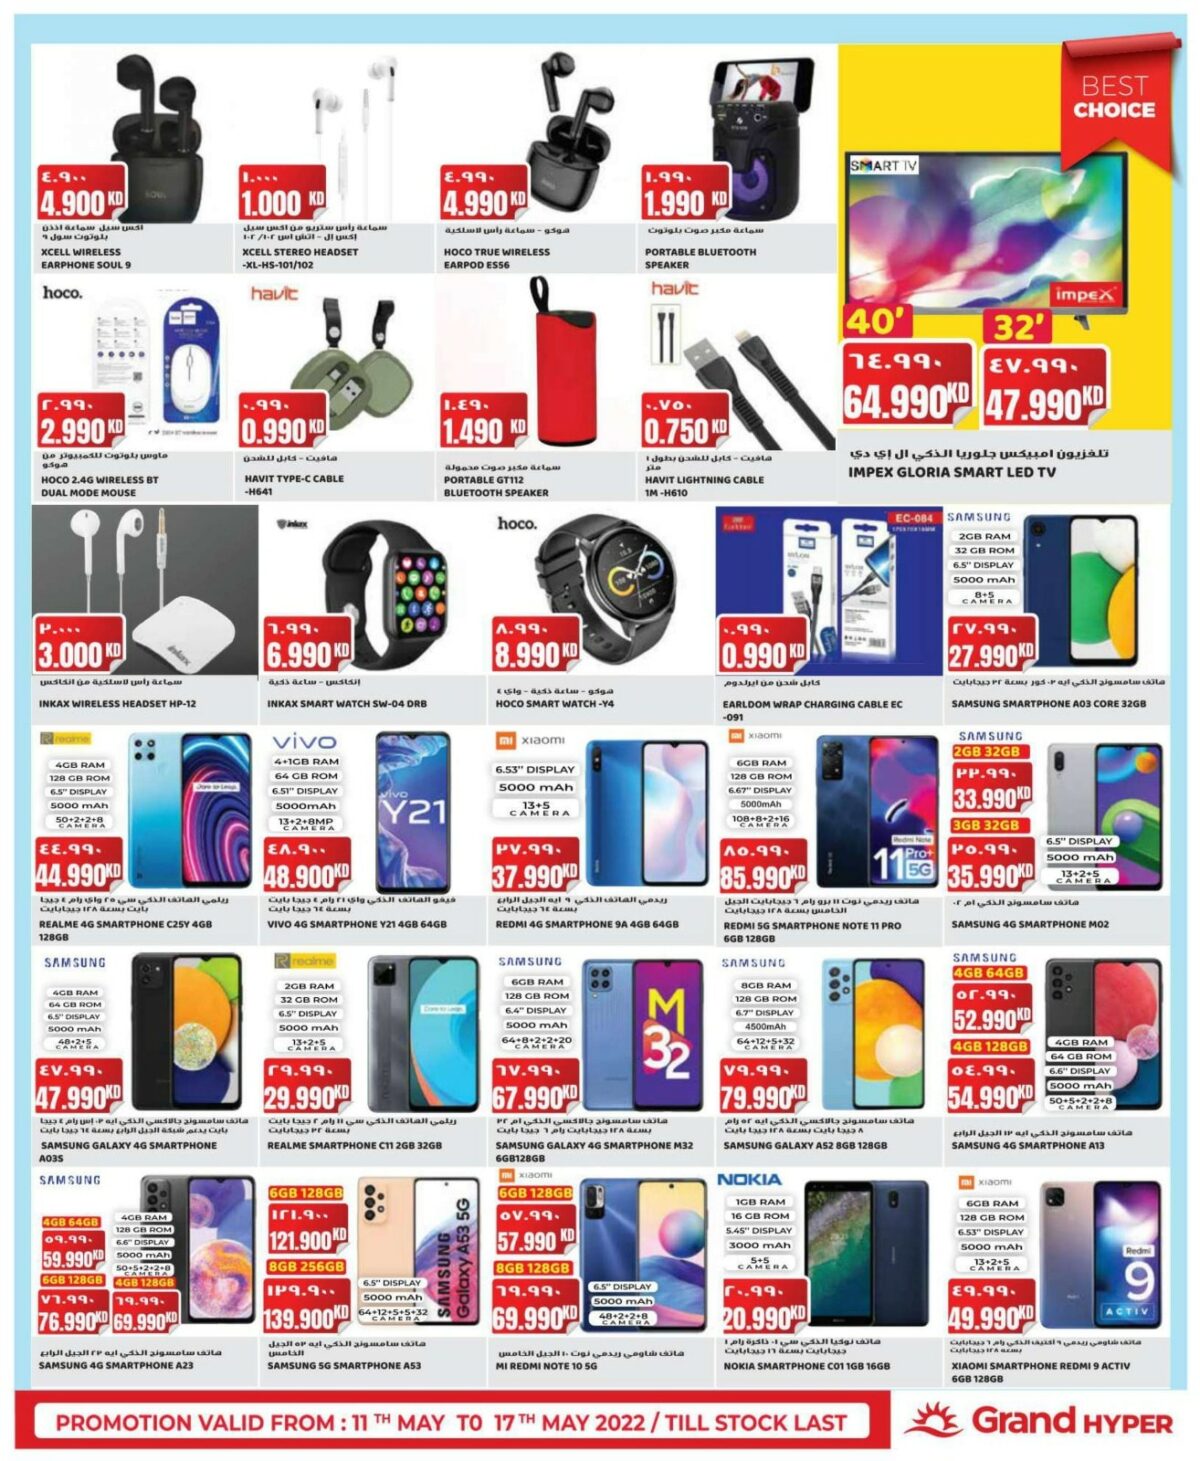 Grand Hypermarket Special Offers, iiQ8 weekly promotions 4